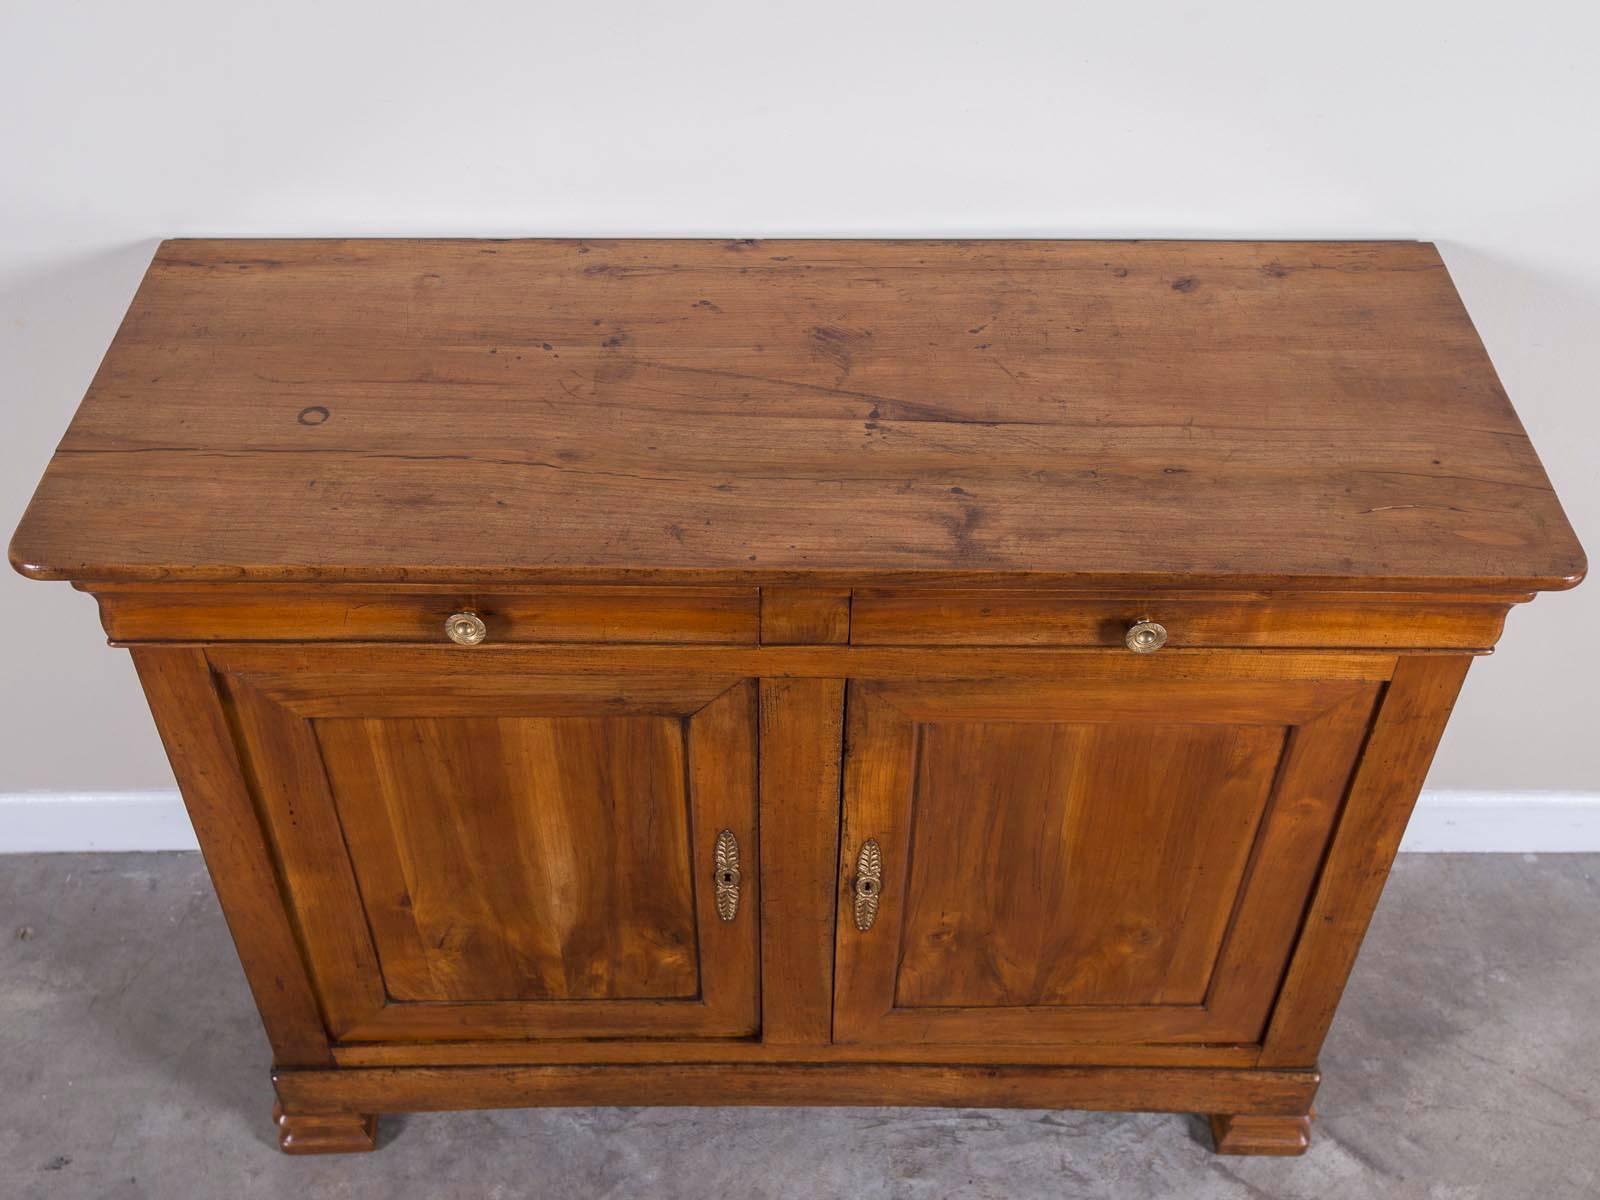 Bold timber, luscious color, modern silhouette. This antique French Louis Philippe cherrywood credenza buffet, circa 1850, has all the hallmarks of a cabinet perfectly suited for a modern interior. The handsome simplicity of this antique French